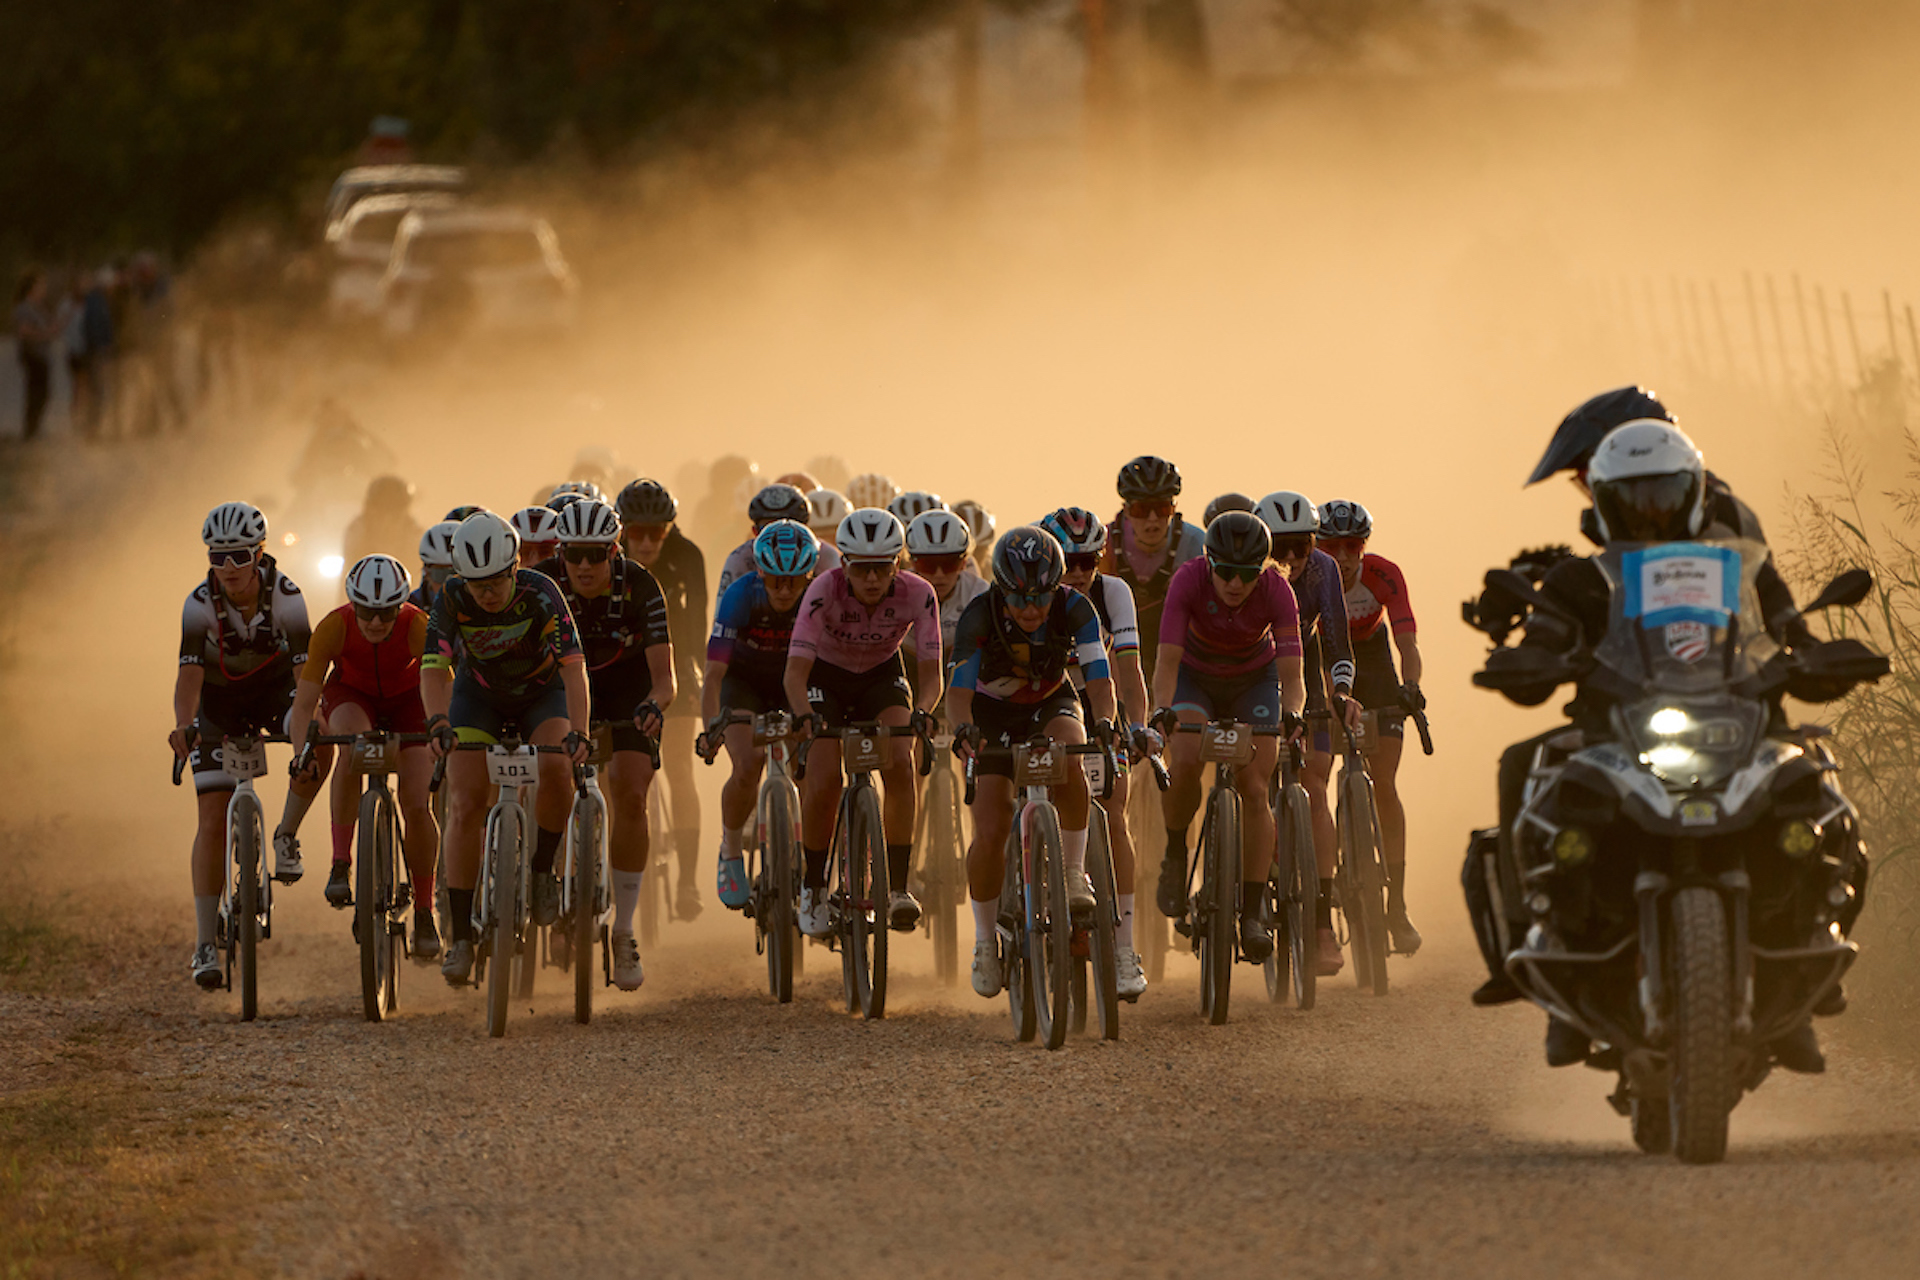 The women's field races at Big Sugar. The light is low and soft, and a pack of riders kicks up a golden cloud of dust behind as a TV moto leads them.